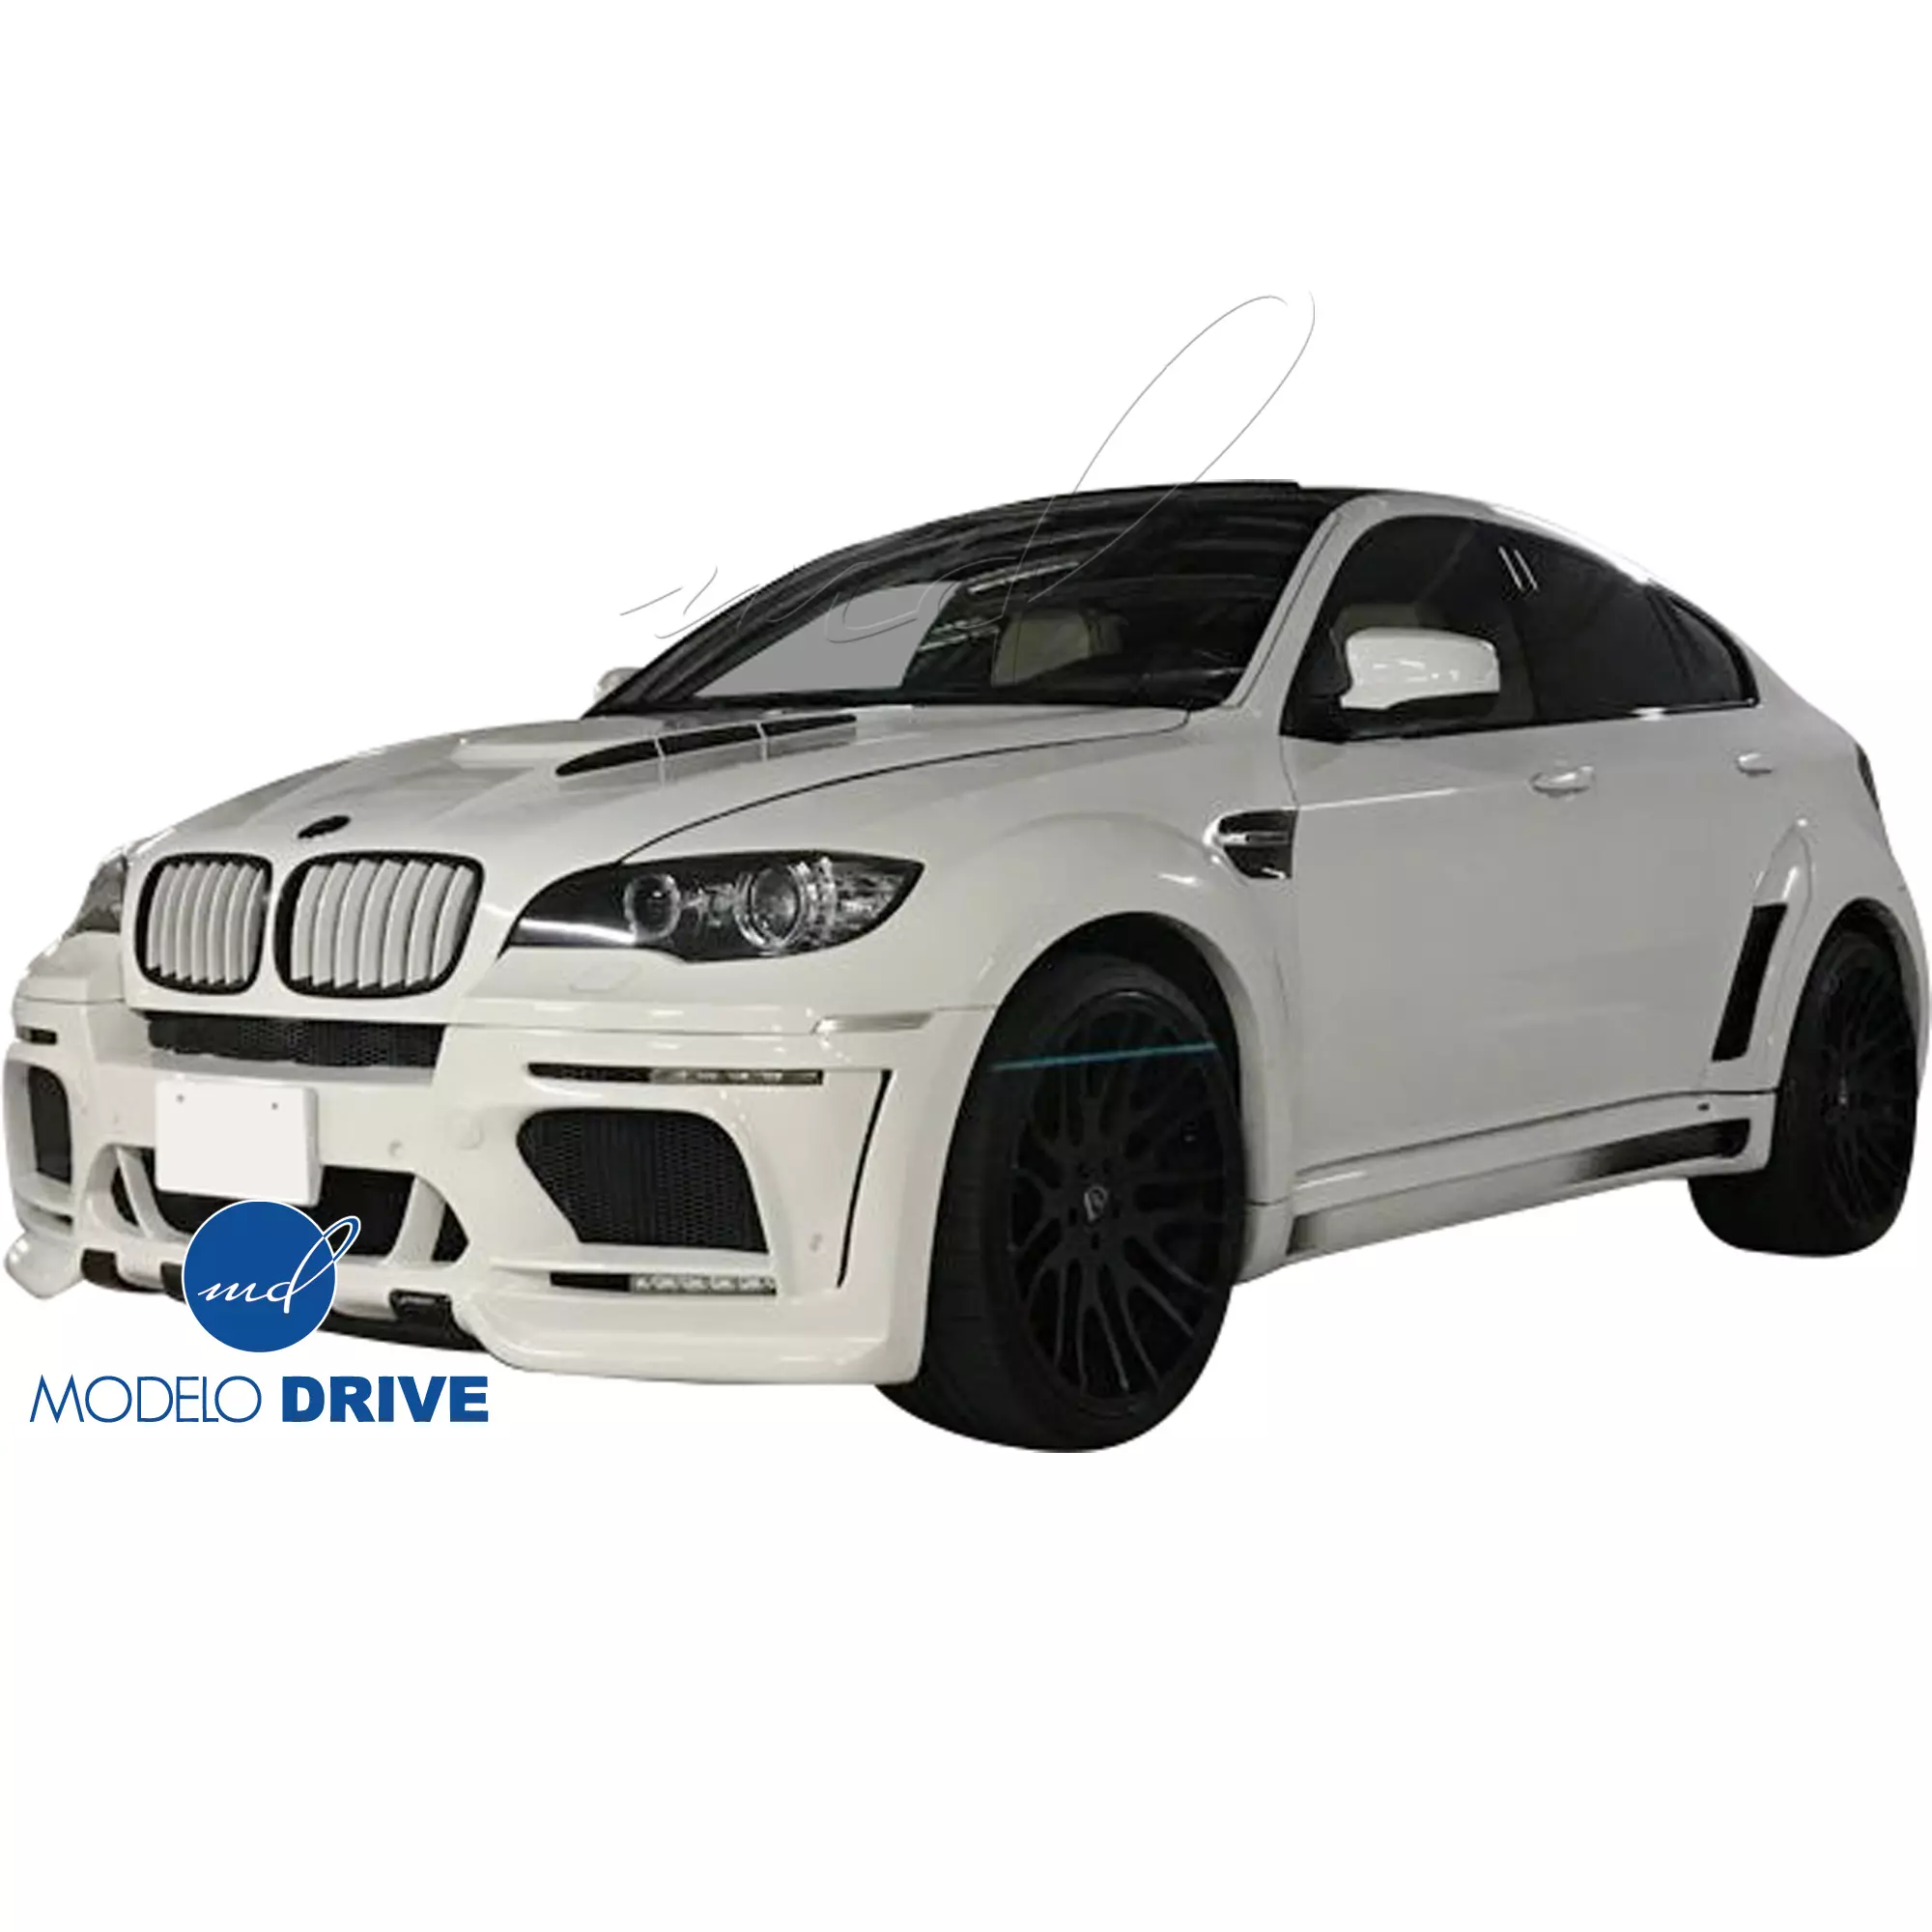 ModeloDrive FRP HAMA Wide Body Fenders (front) 2pc > BMW X6 E71 2008-2014 - Image 7